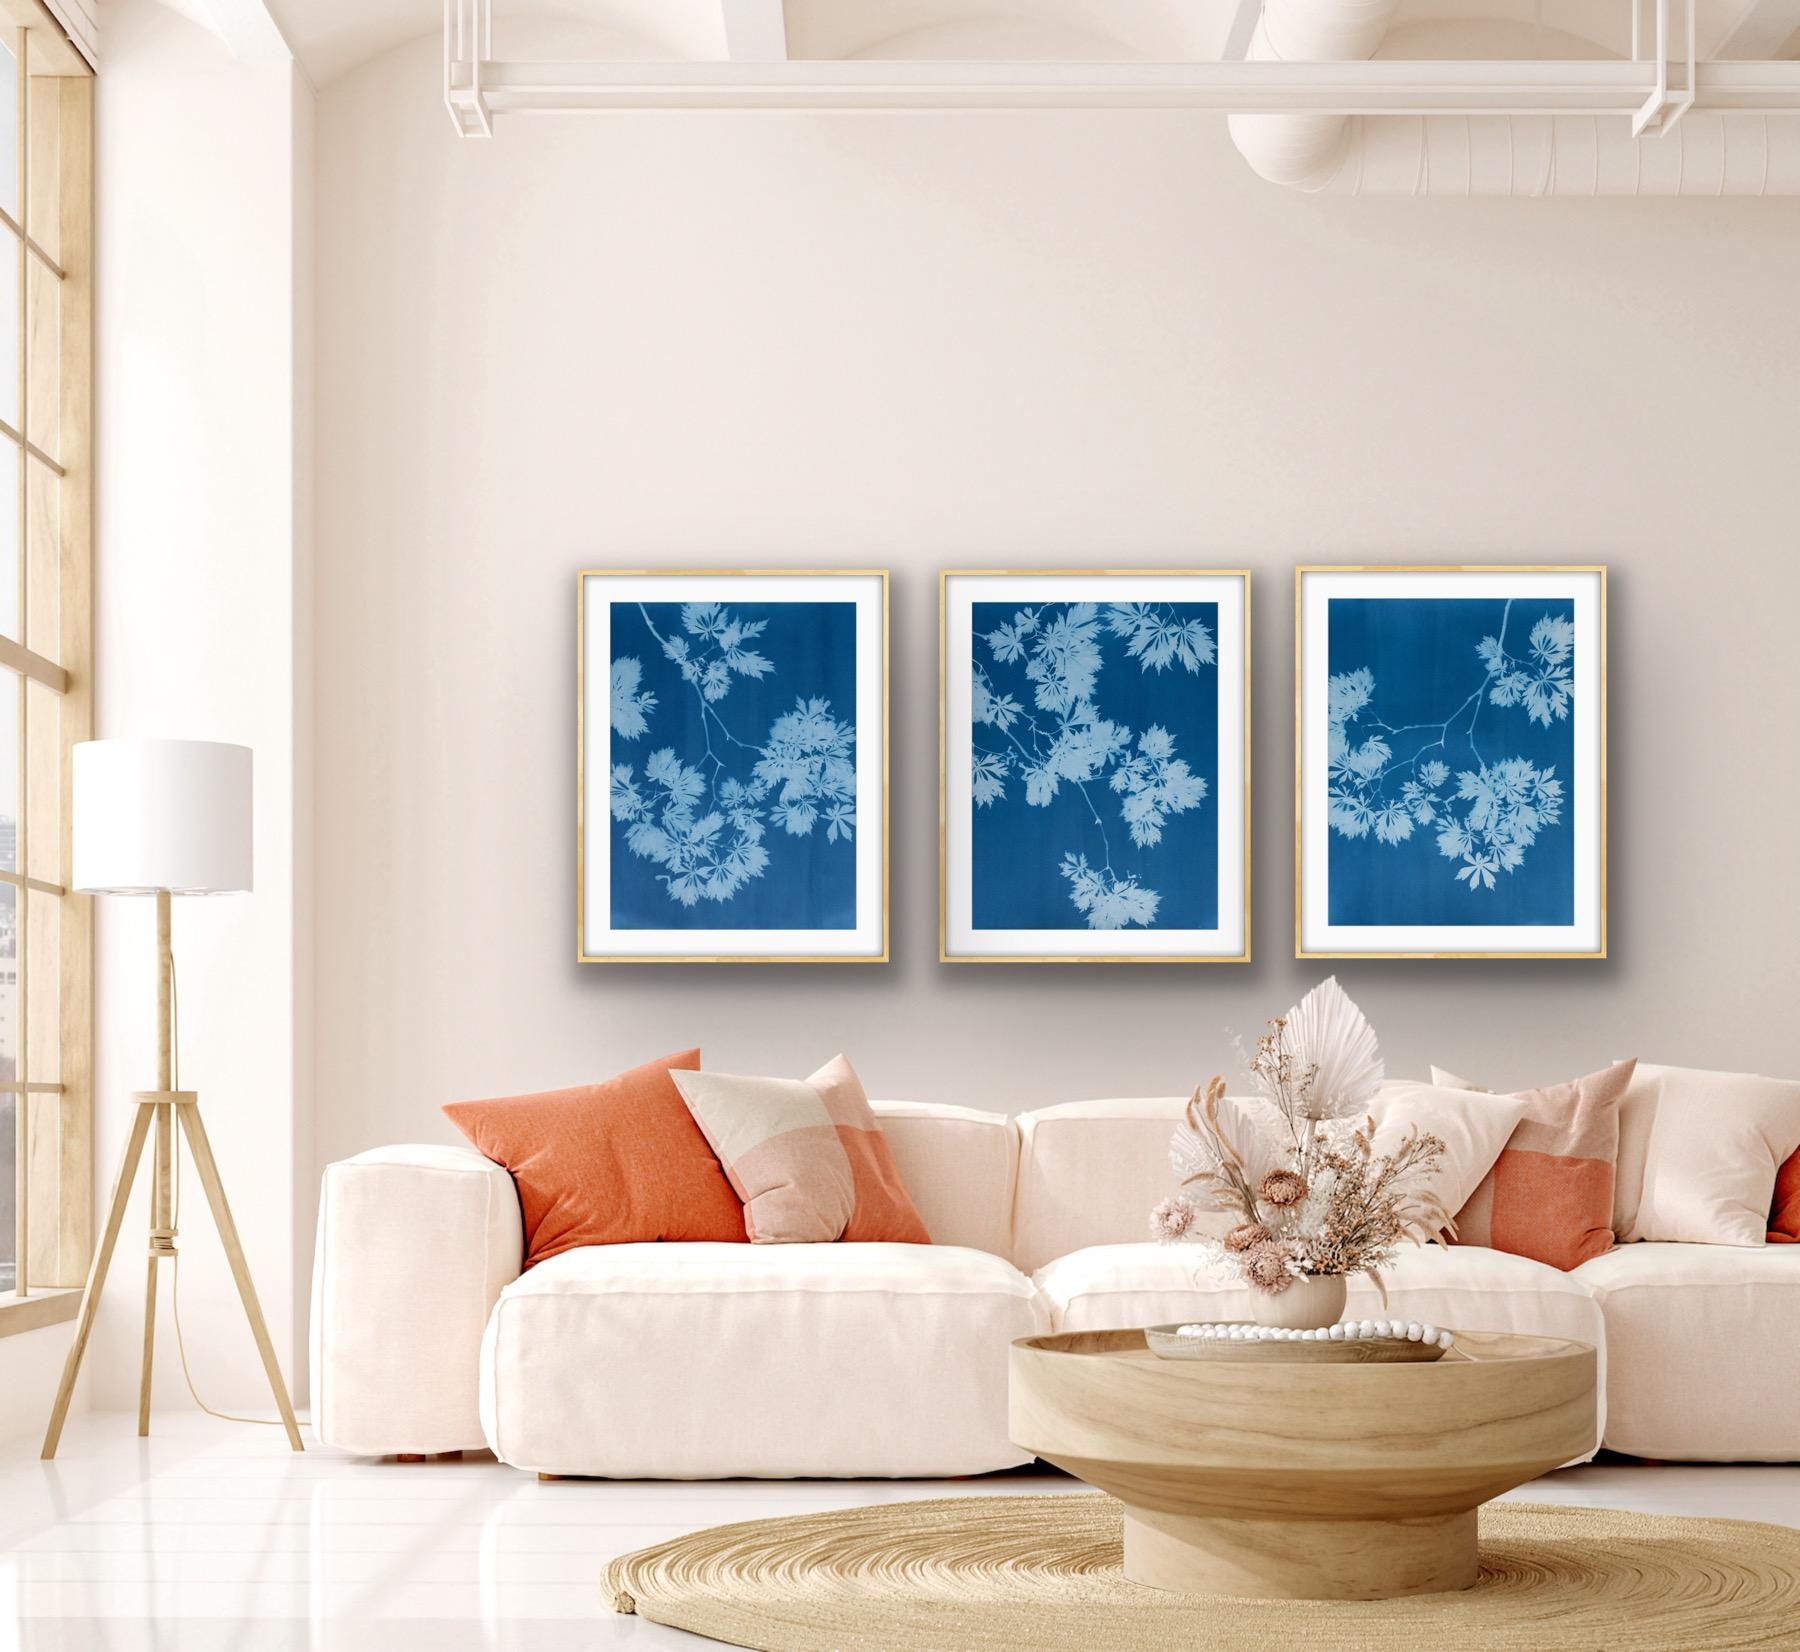 Indigo Maple Triptych (3 hand-printed botanical cyanotypes, 24 x 18 in. each) For Sale 3